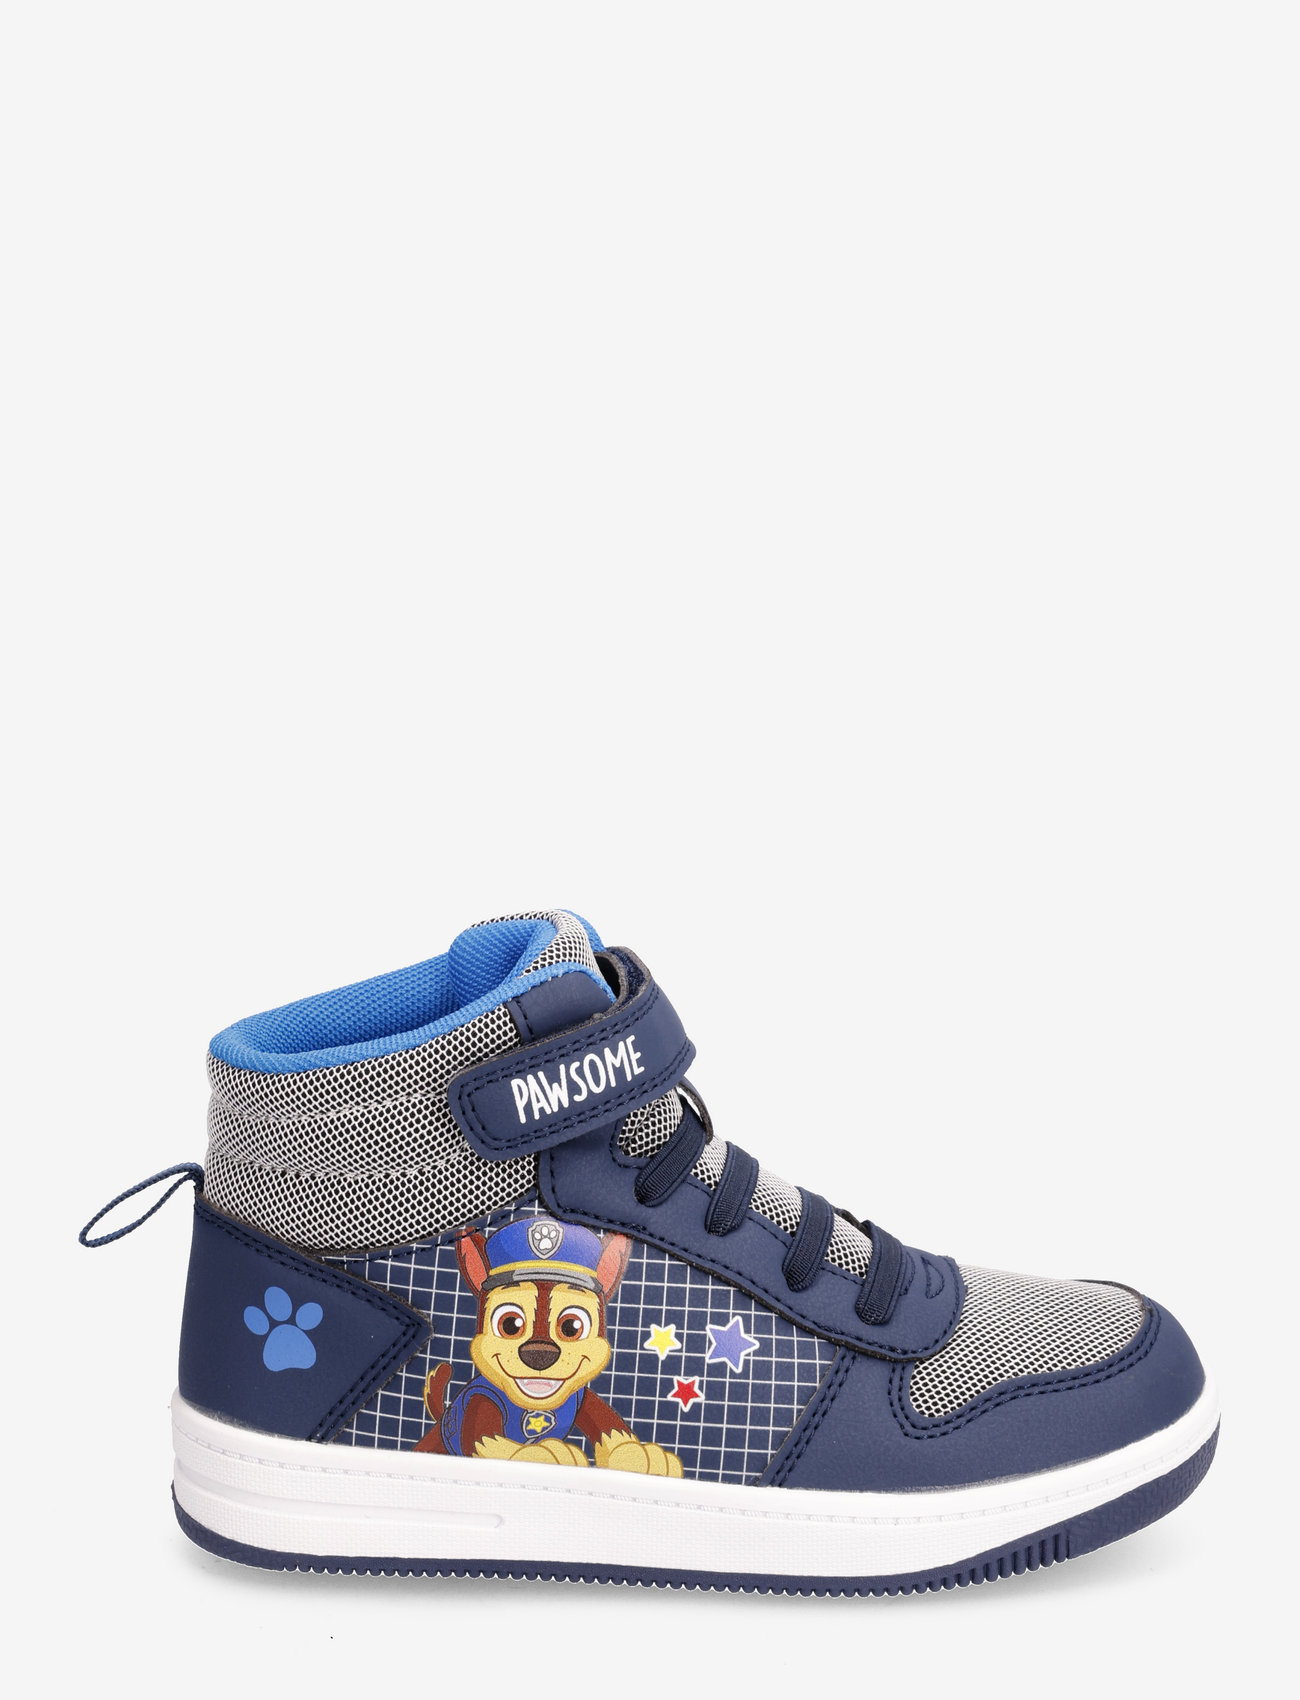 Leomil - PAW PATROL HIGH SNEAKER - lowest prices - navy - 1